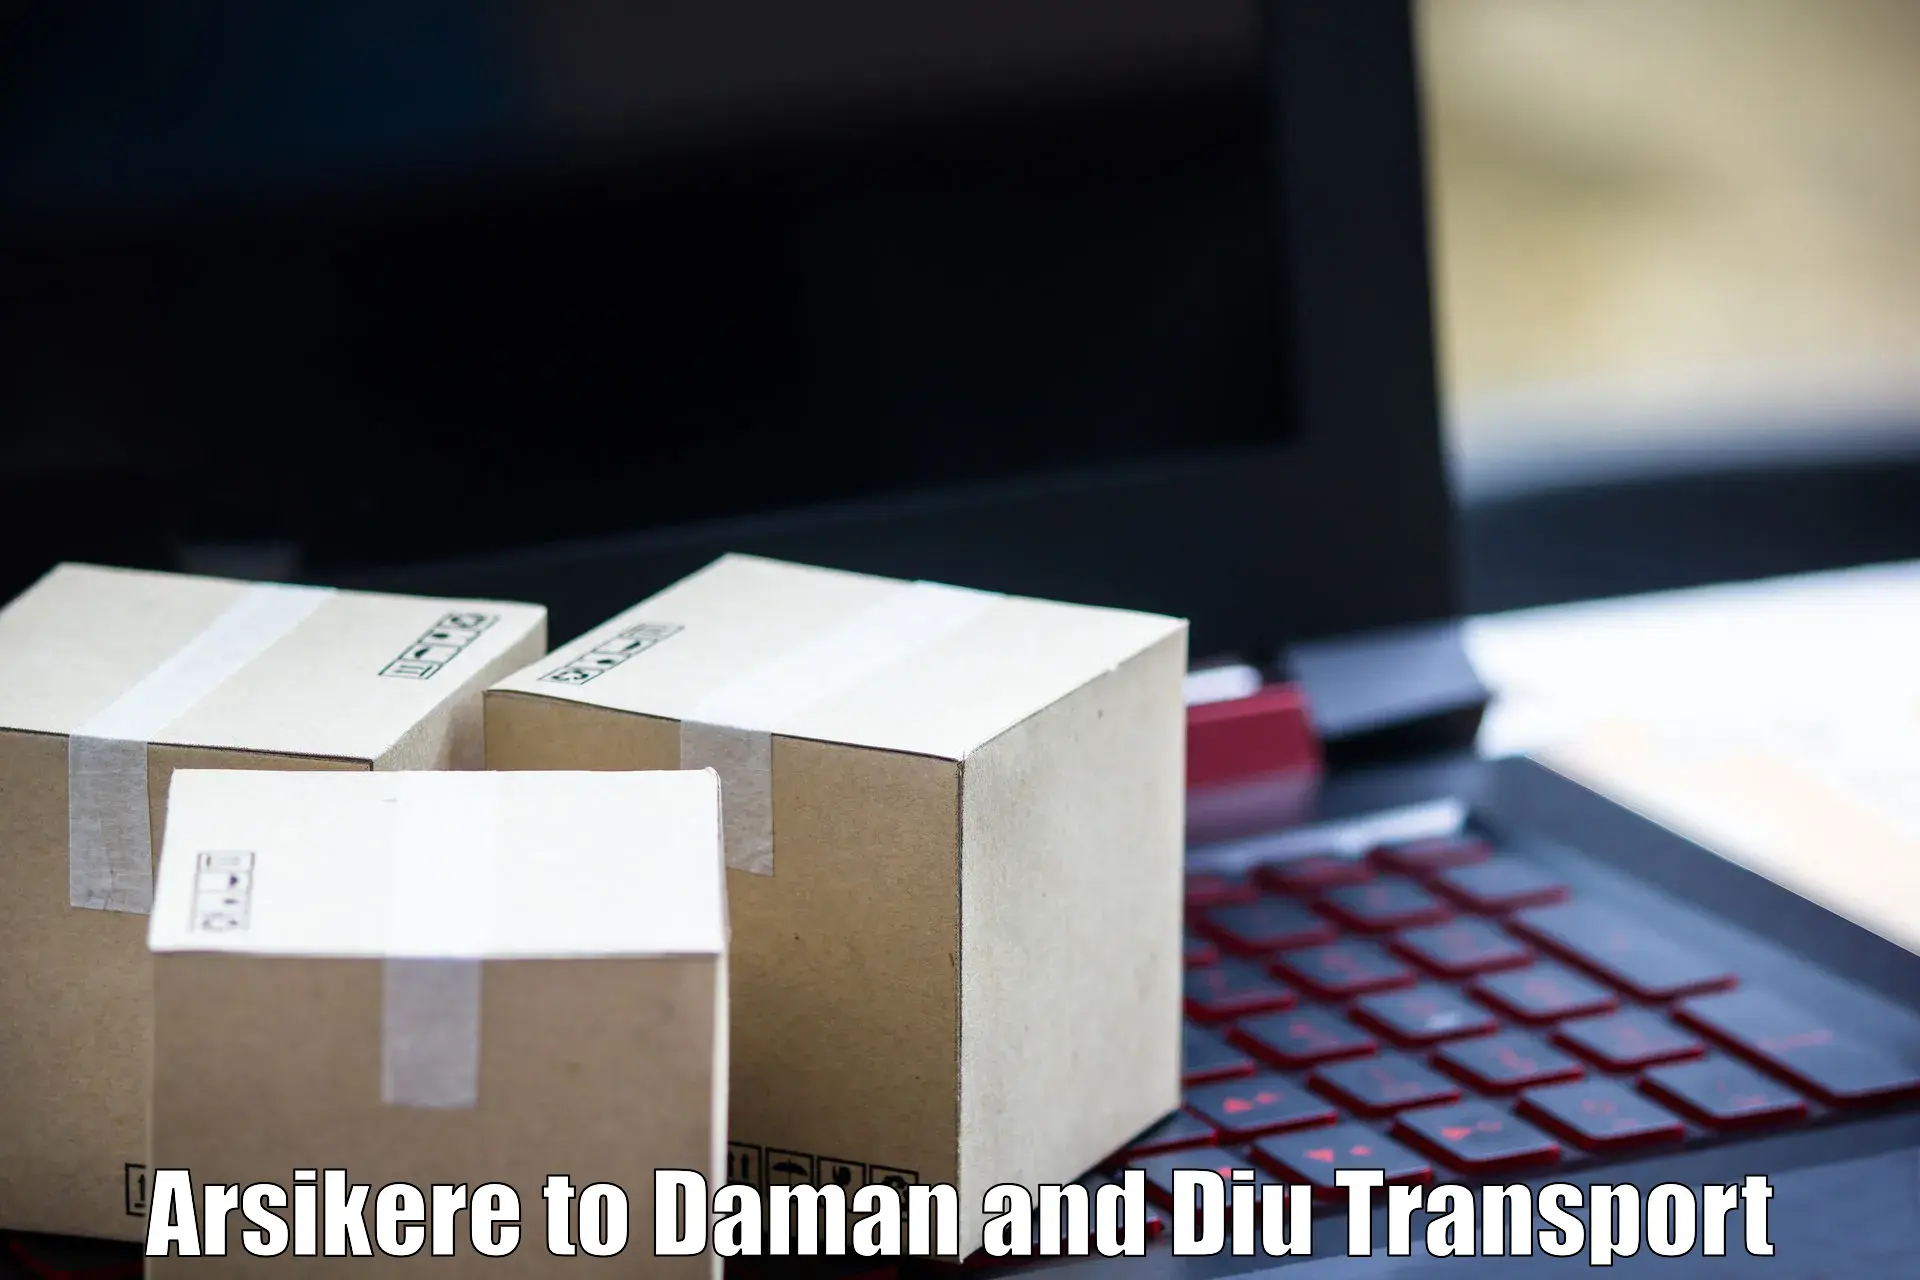 Cargo train transport services Arsikere to Daman and Diu